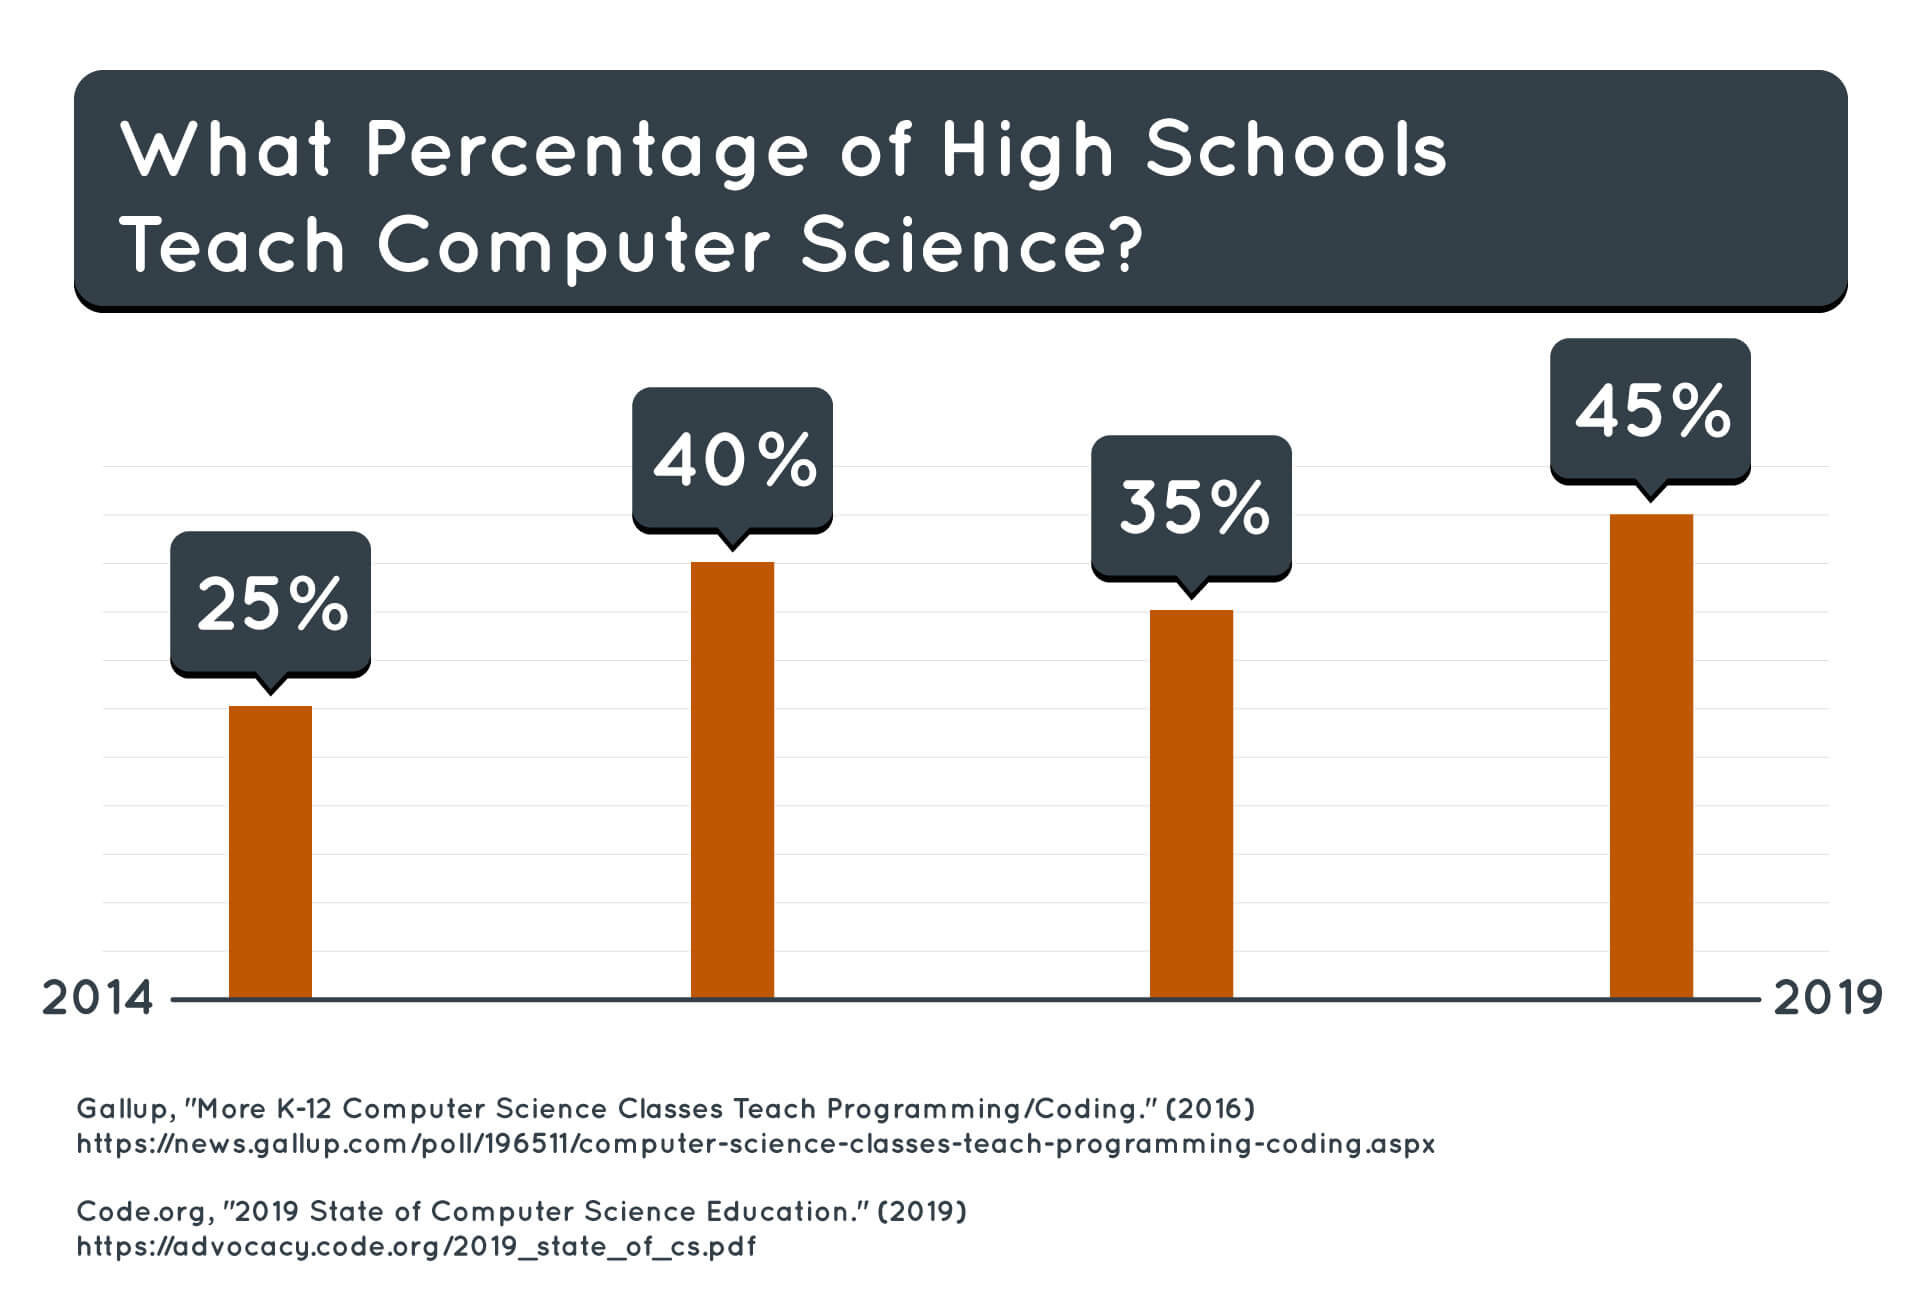 A graph showing what percentage of high schools teach computer science